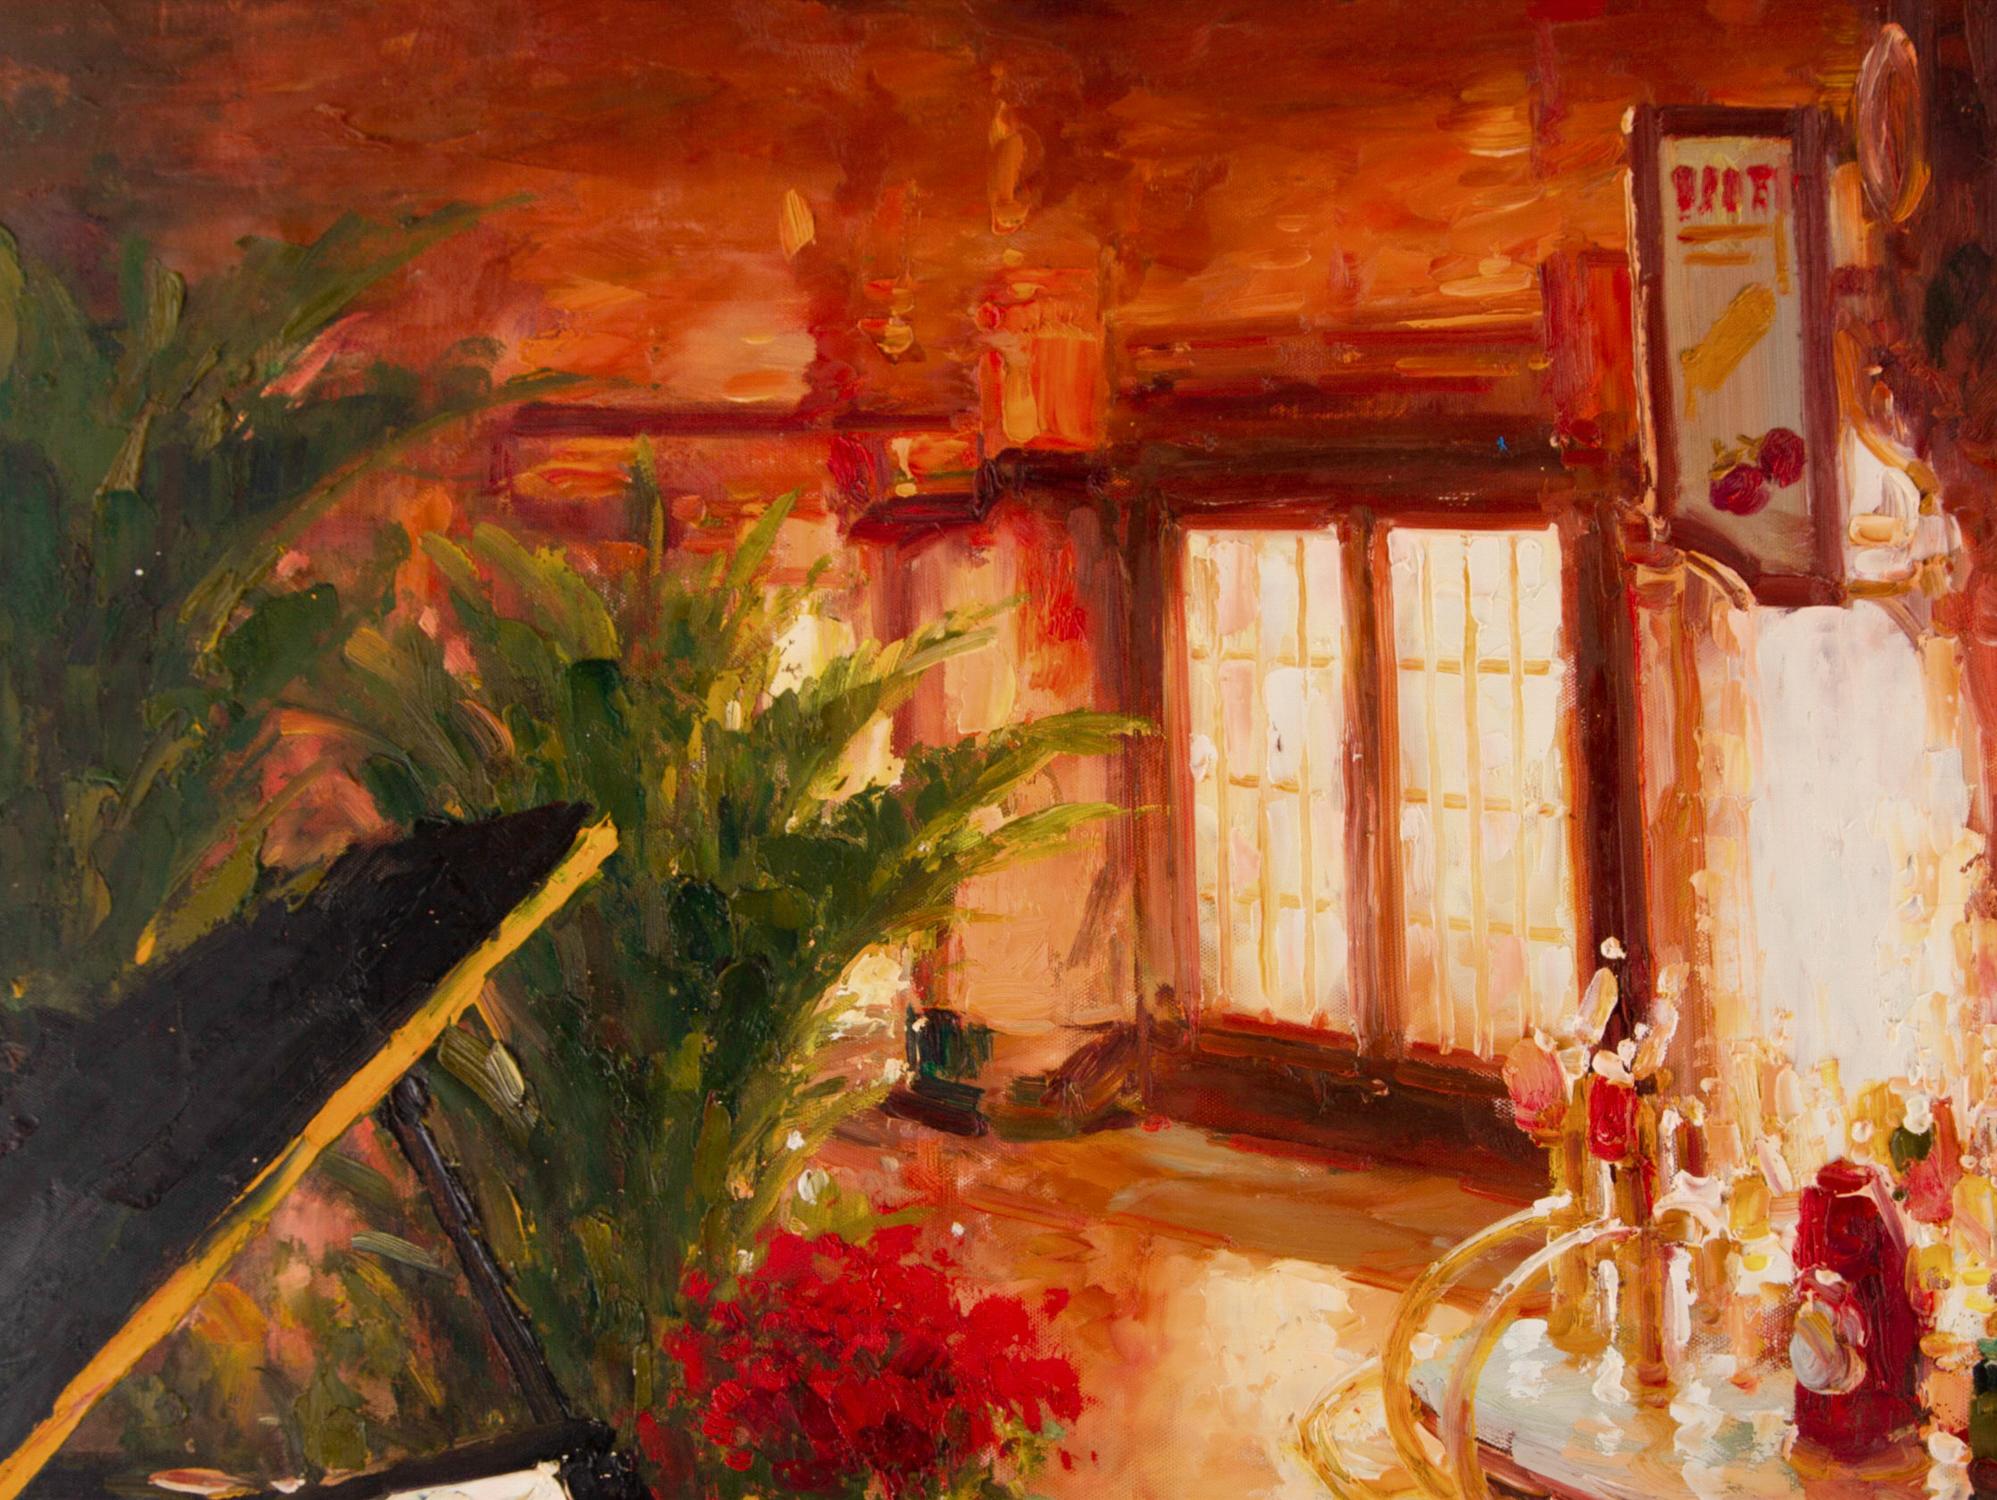  Title: Bar 4
 Medium: Oil on canvas
 Size: 35 x 35 inches
 Frame: Framing options available!
 Condition: The painting is laid on the matt board and appears to be in excellent condition.
 
 Year: 2000 Circa
 Artist: Lin Hongdan 
 Signature: